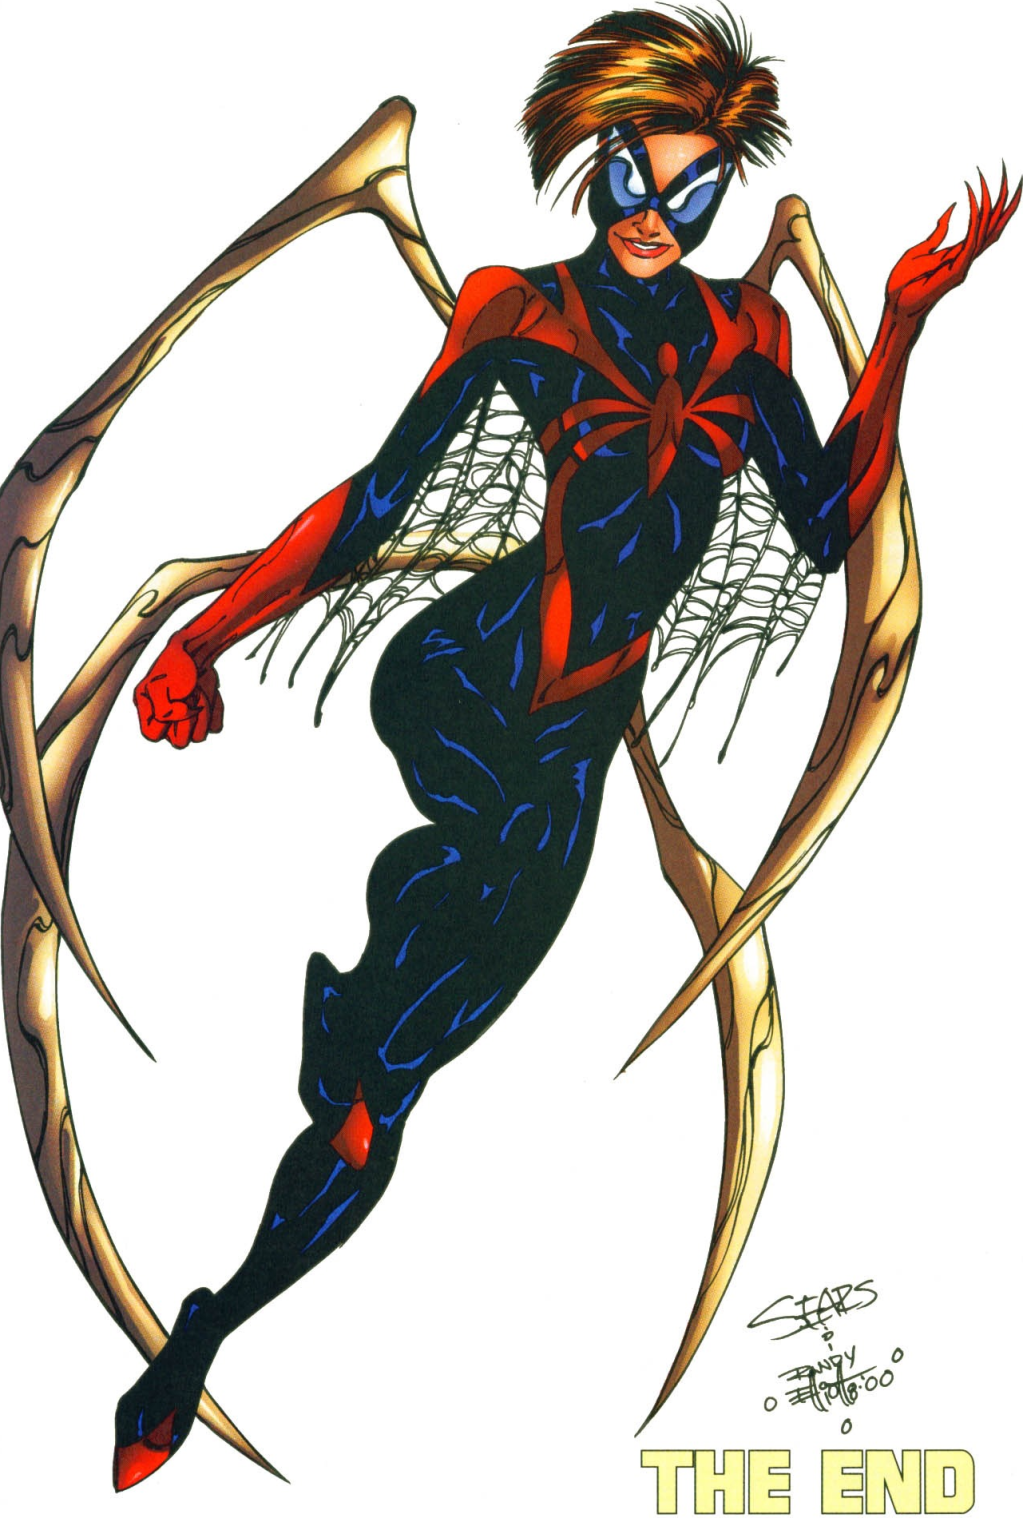 Mattie Franklin appears for a pin-up in honor of her solo series' final issue in Spider-Woman Vol. 3 #18 "Dry Bones" (2000), Marvel Comics. Words by John Byrne, art by Bart Sears, Randy Elliot, and Steve Oliff.